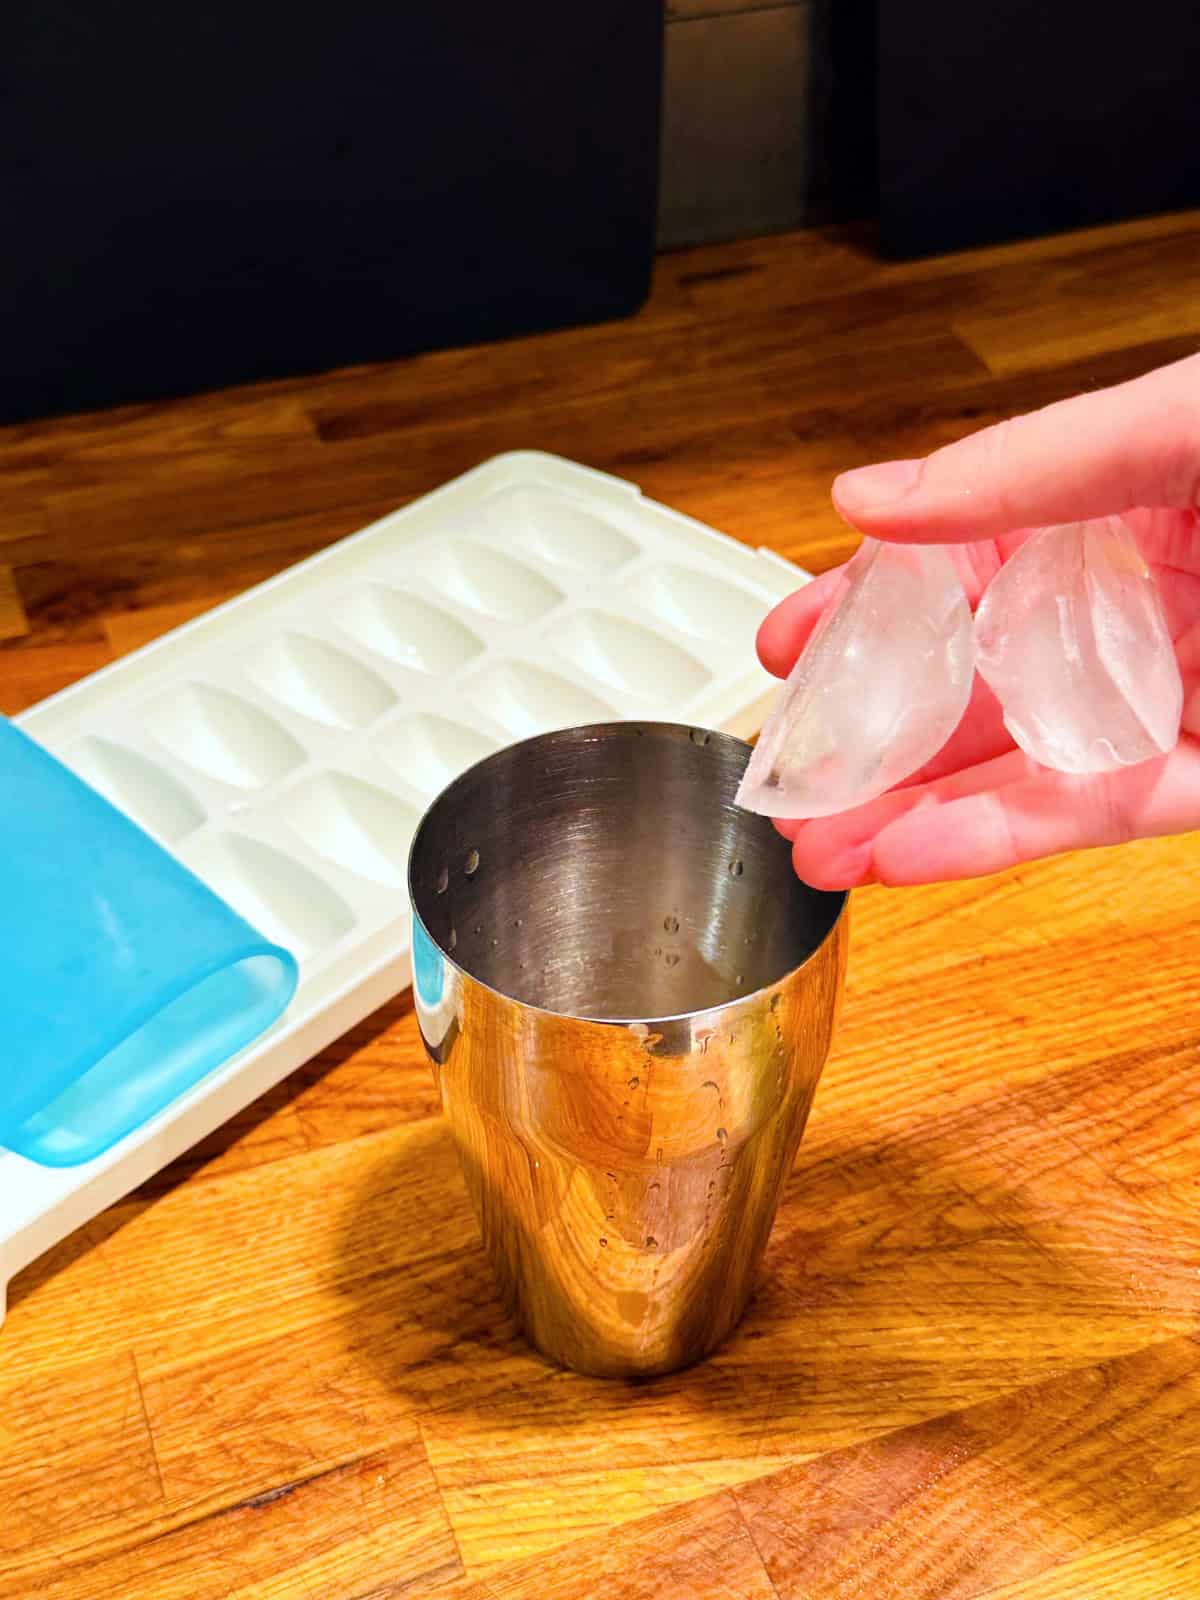 Large ice cubes being dropped into a cocktail shaker sitting next to a white ice cube tray with a light blue lid.